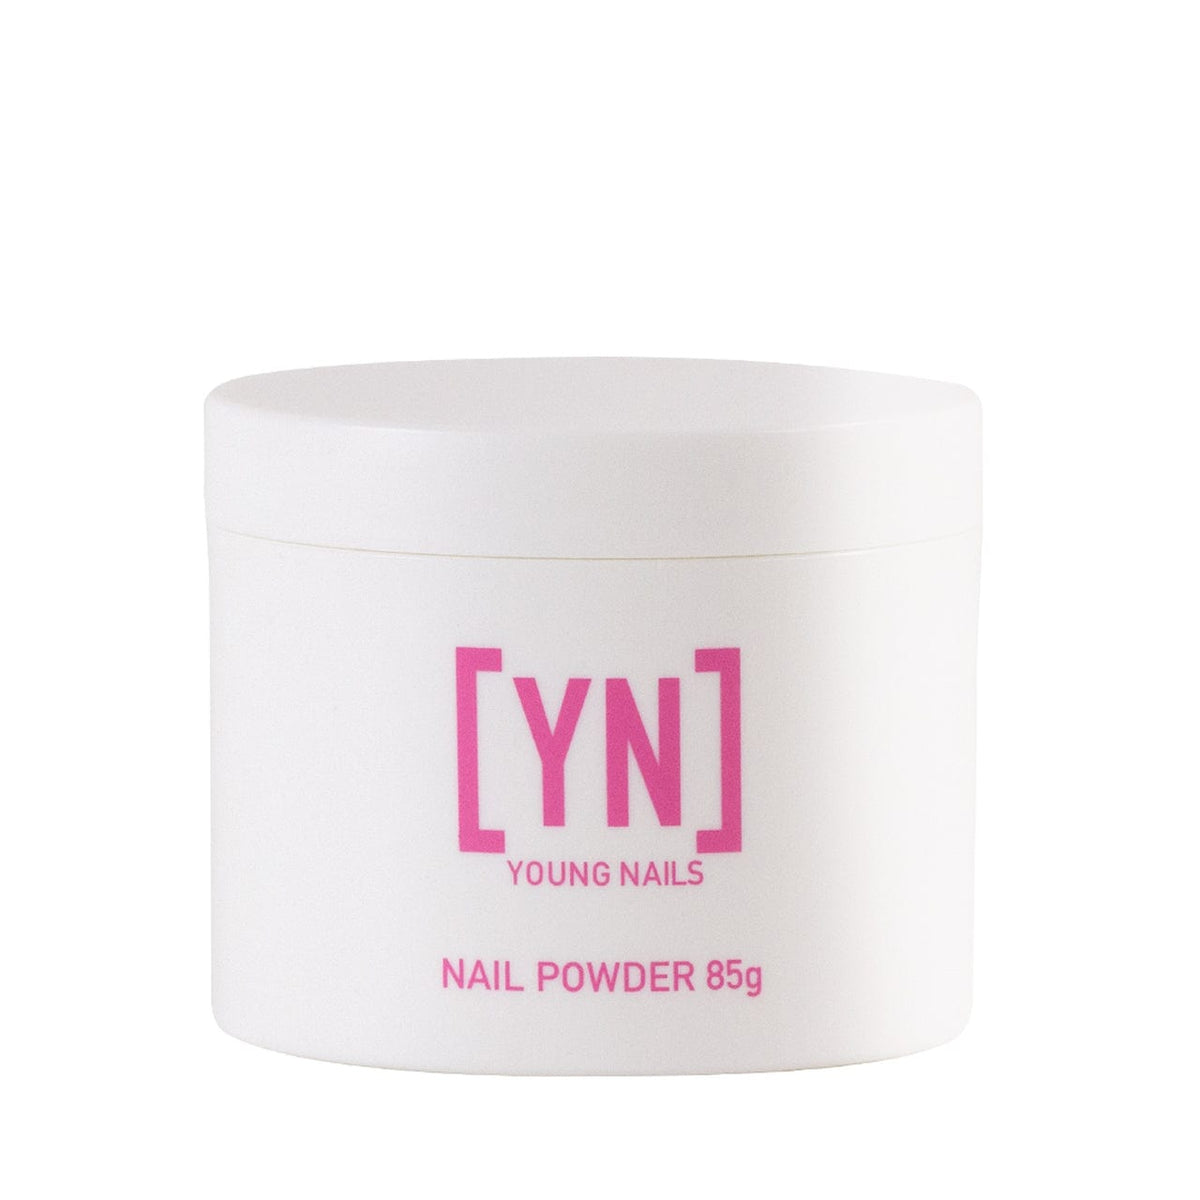 85g Speed Frosted Pink Powder Nails - Young Nails - Luxe Pacifique